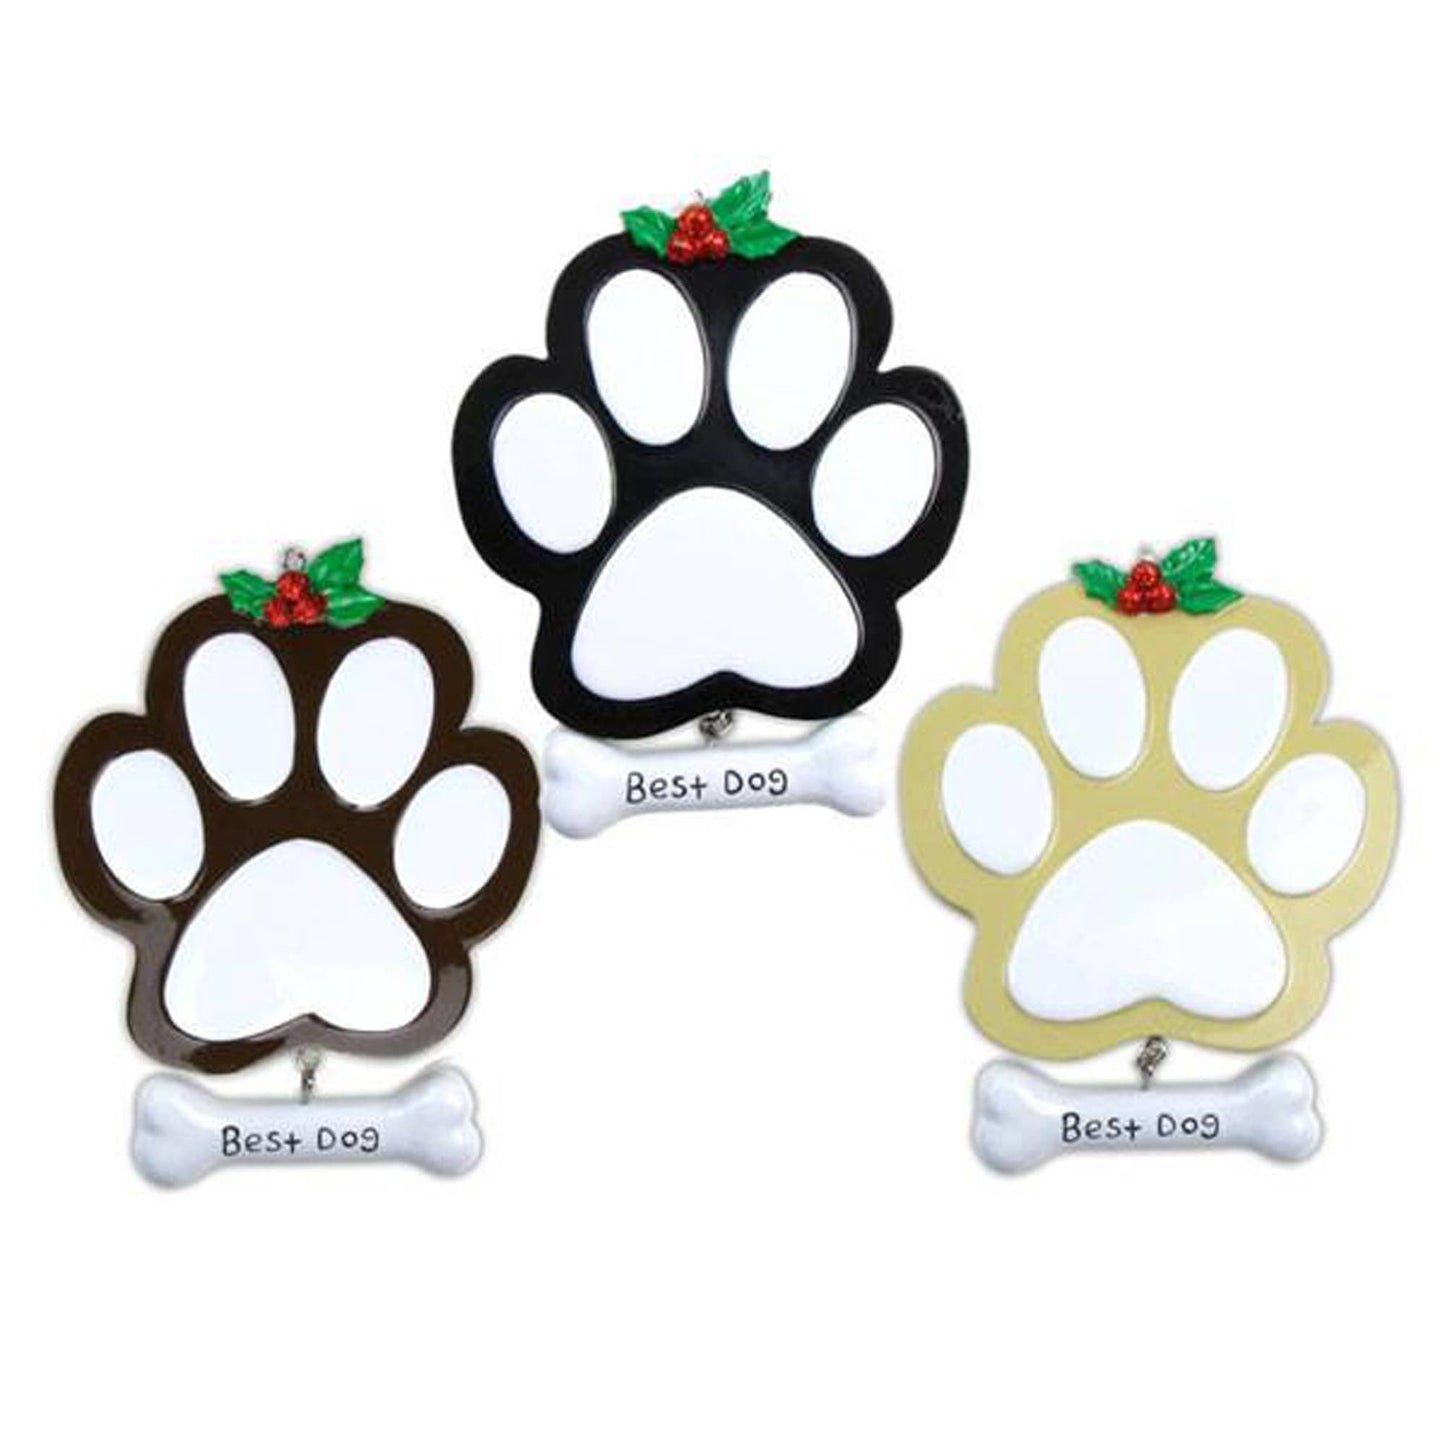 Dog Paw - Assorted Colors - Personalized Christmas Ornament